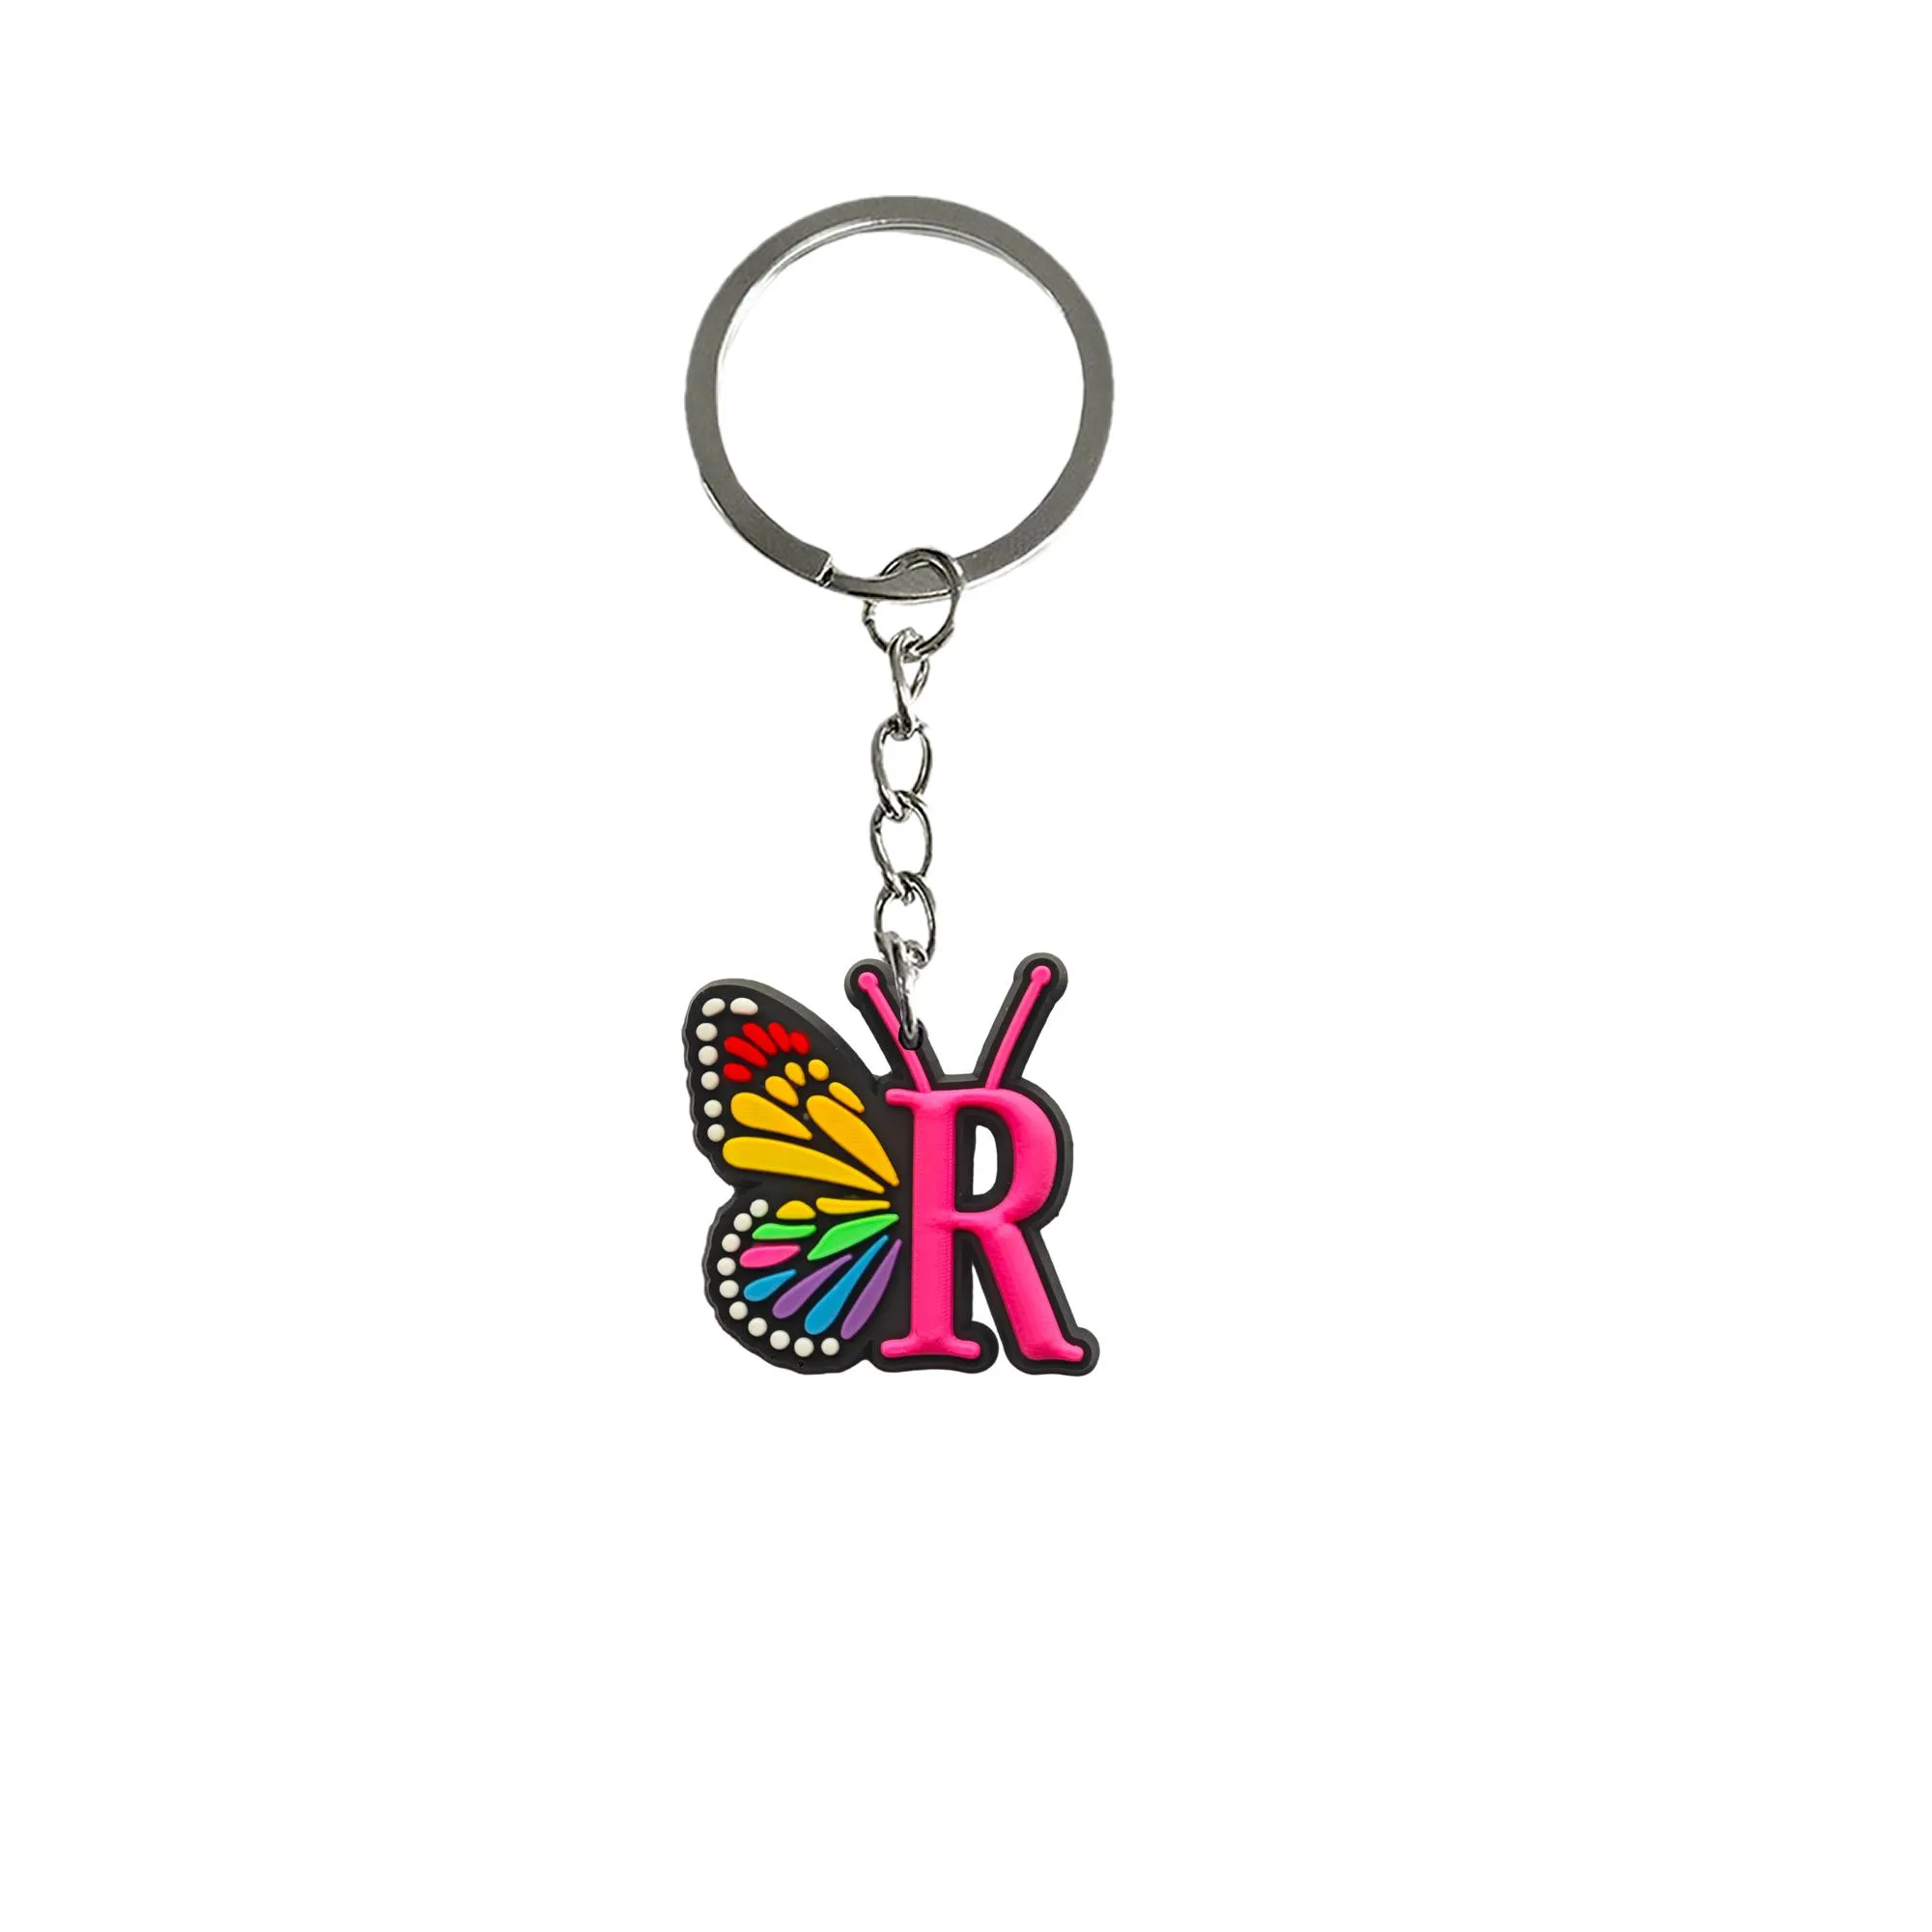 Other Letter Butterfly Keychain Mini Cute Keyring For Classroom Prizes Boys Keychains Key Chain Kid Boy Girl Party Favors Gift Suitabl Otxd3